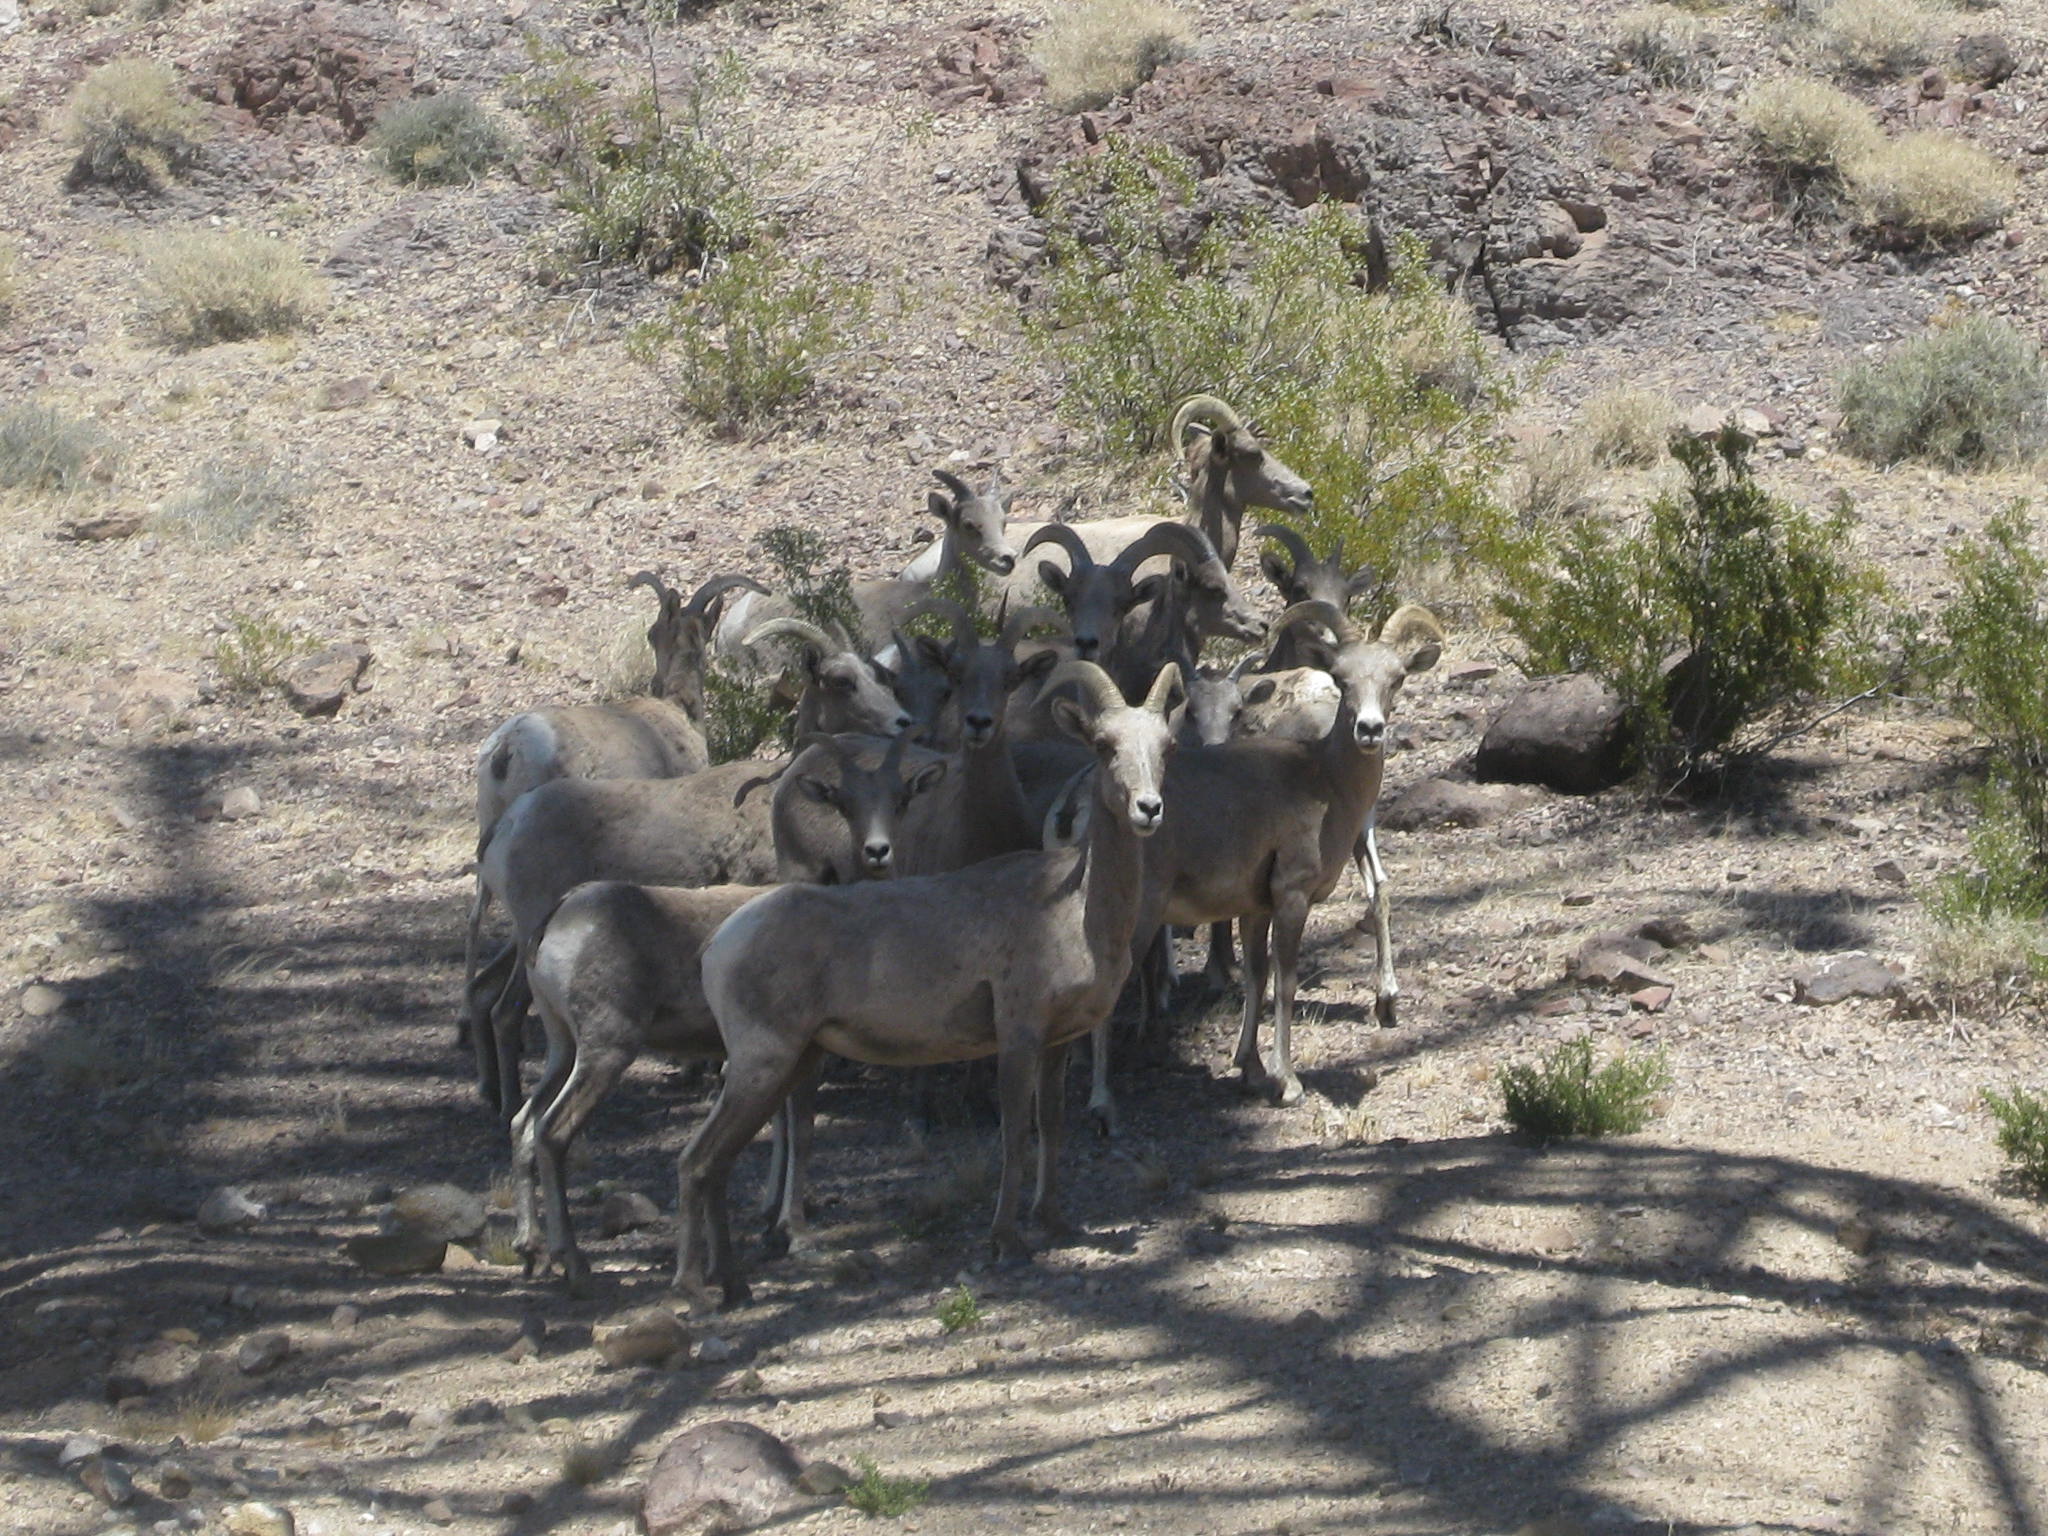 Bighorn sheep resting in the shade of a transmission tower